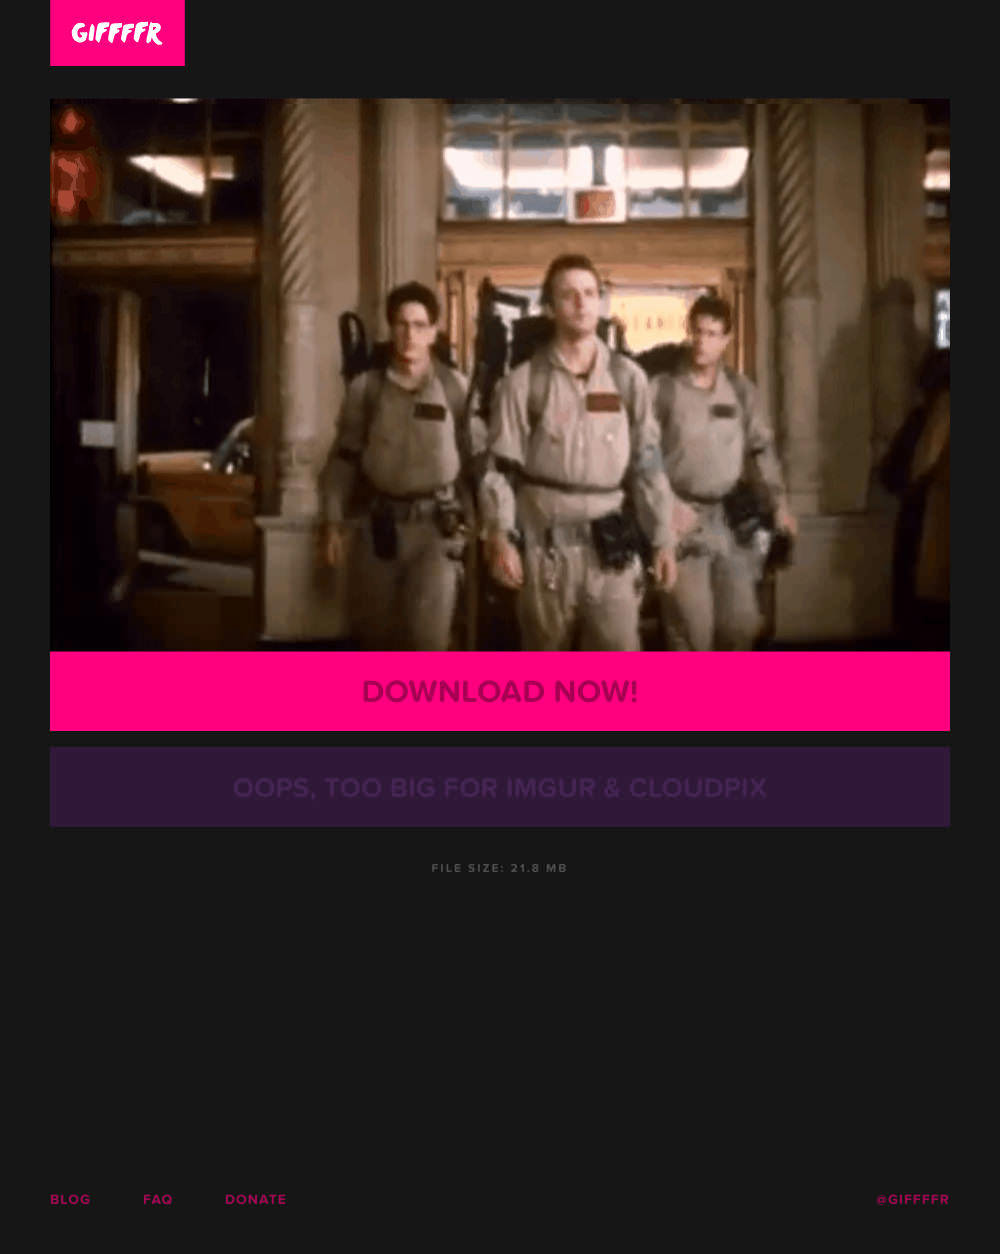 A screen showing a completed GIF made using GIFFFFR